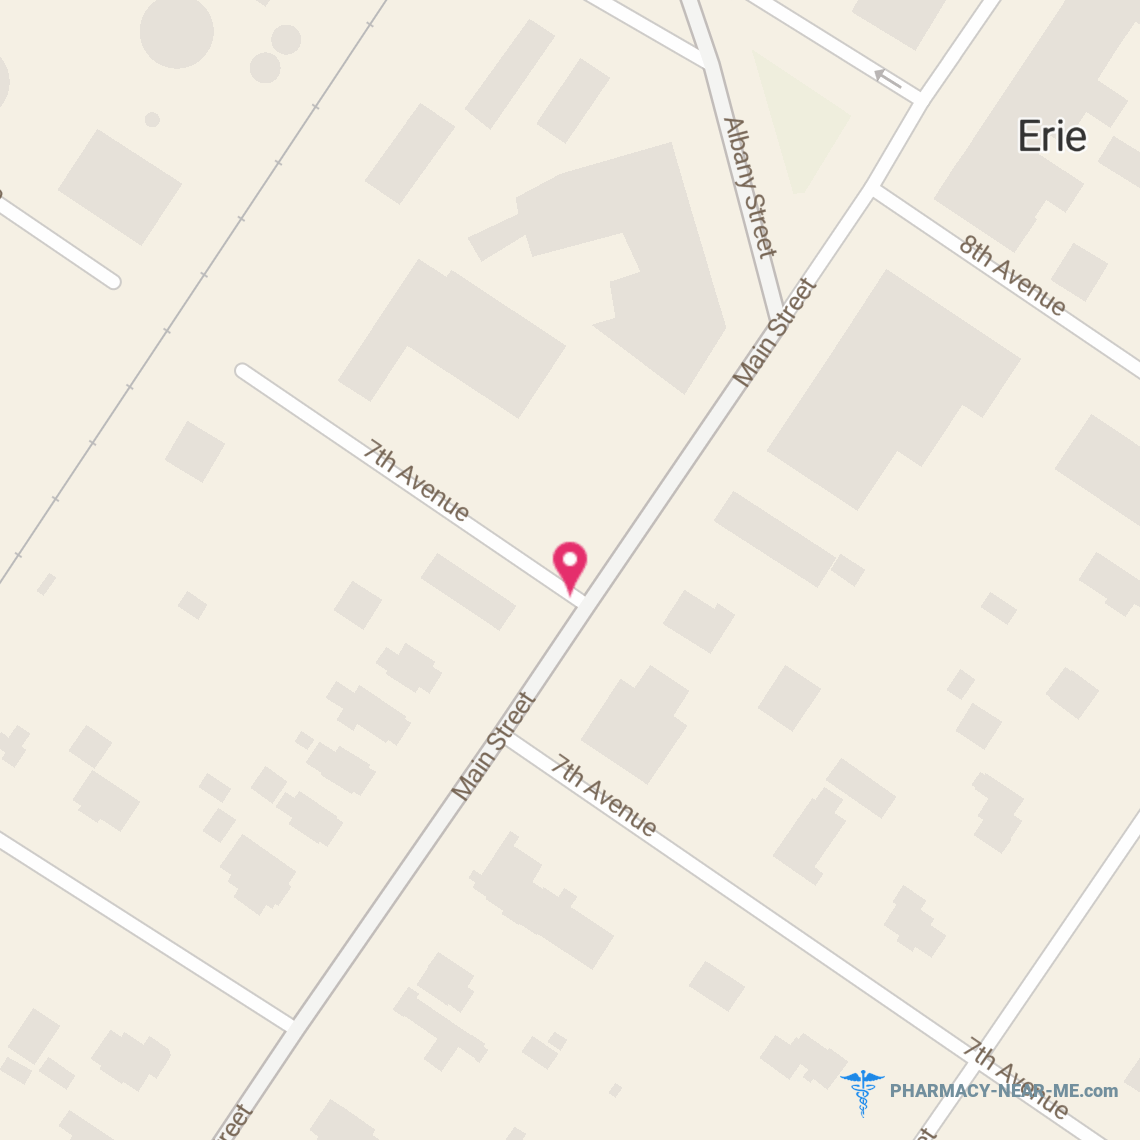 ERIE TELEPHARMACY - Pharmacy Hours, Phone, Reviews & Information: 707 Main Street, Erie, Illinois 61250, United States